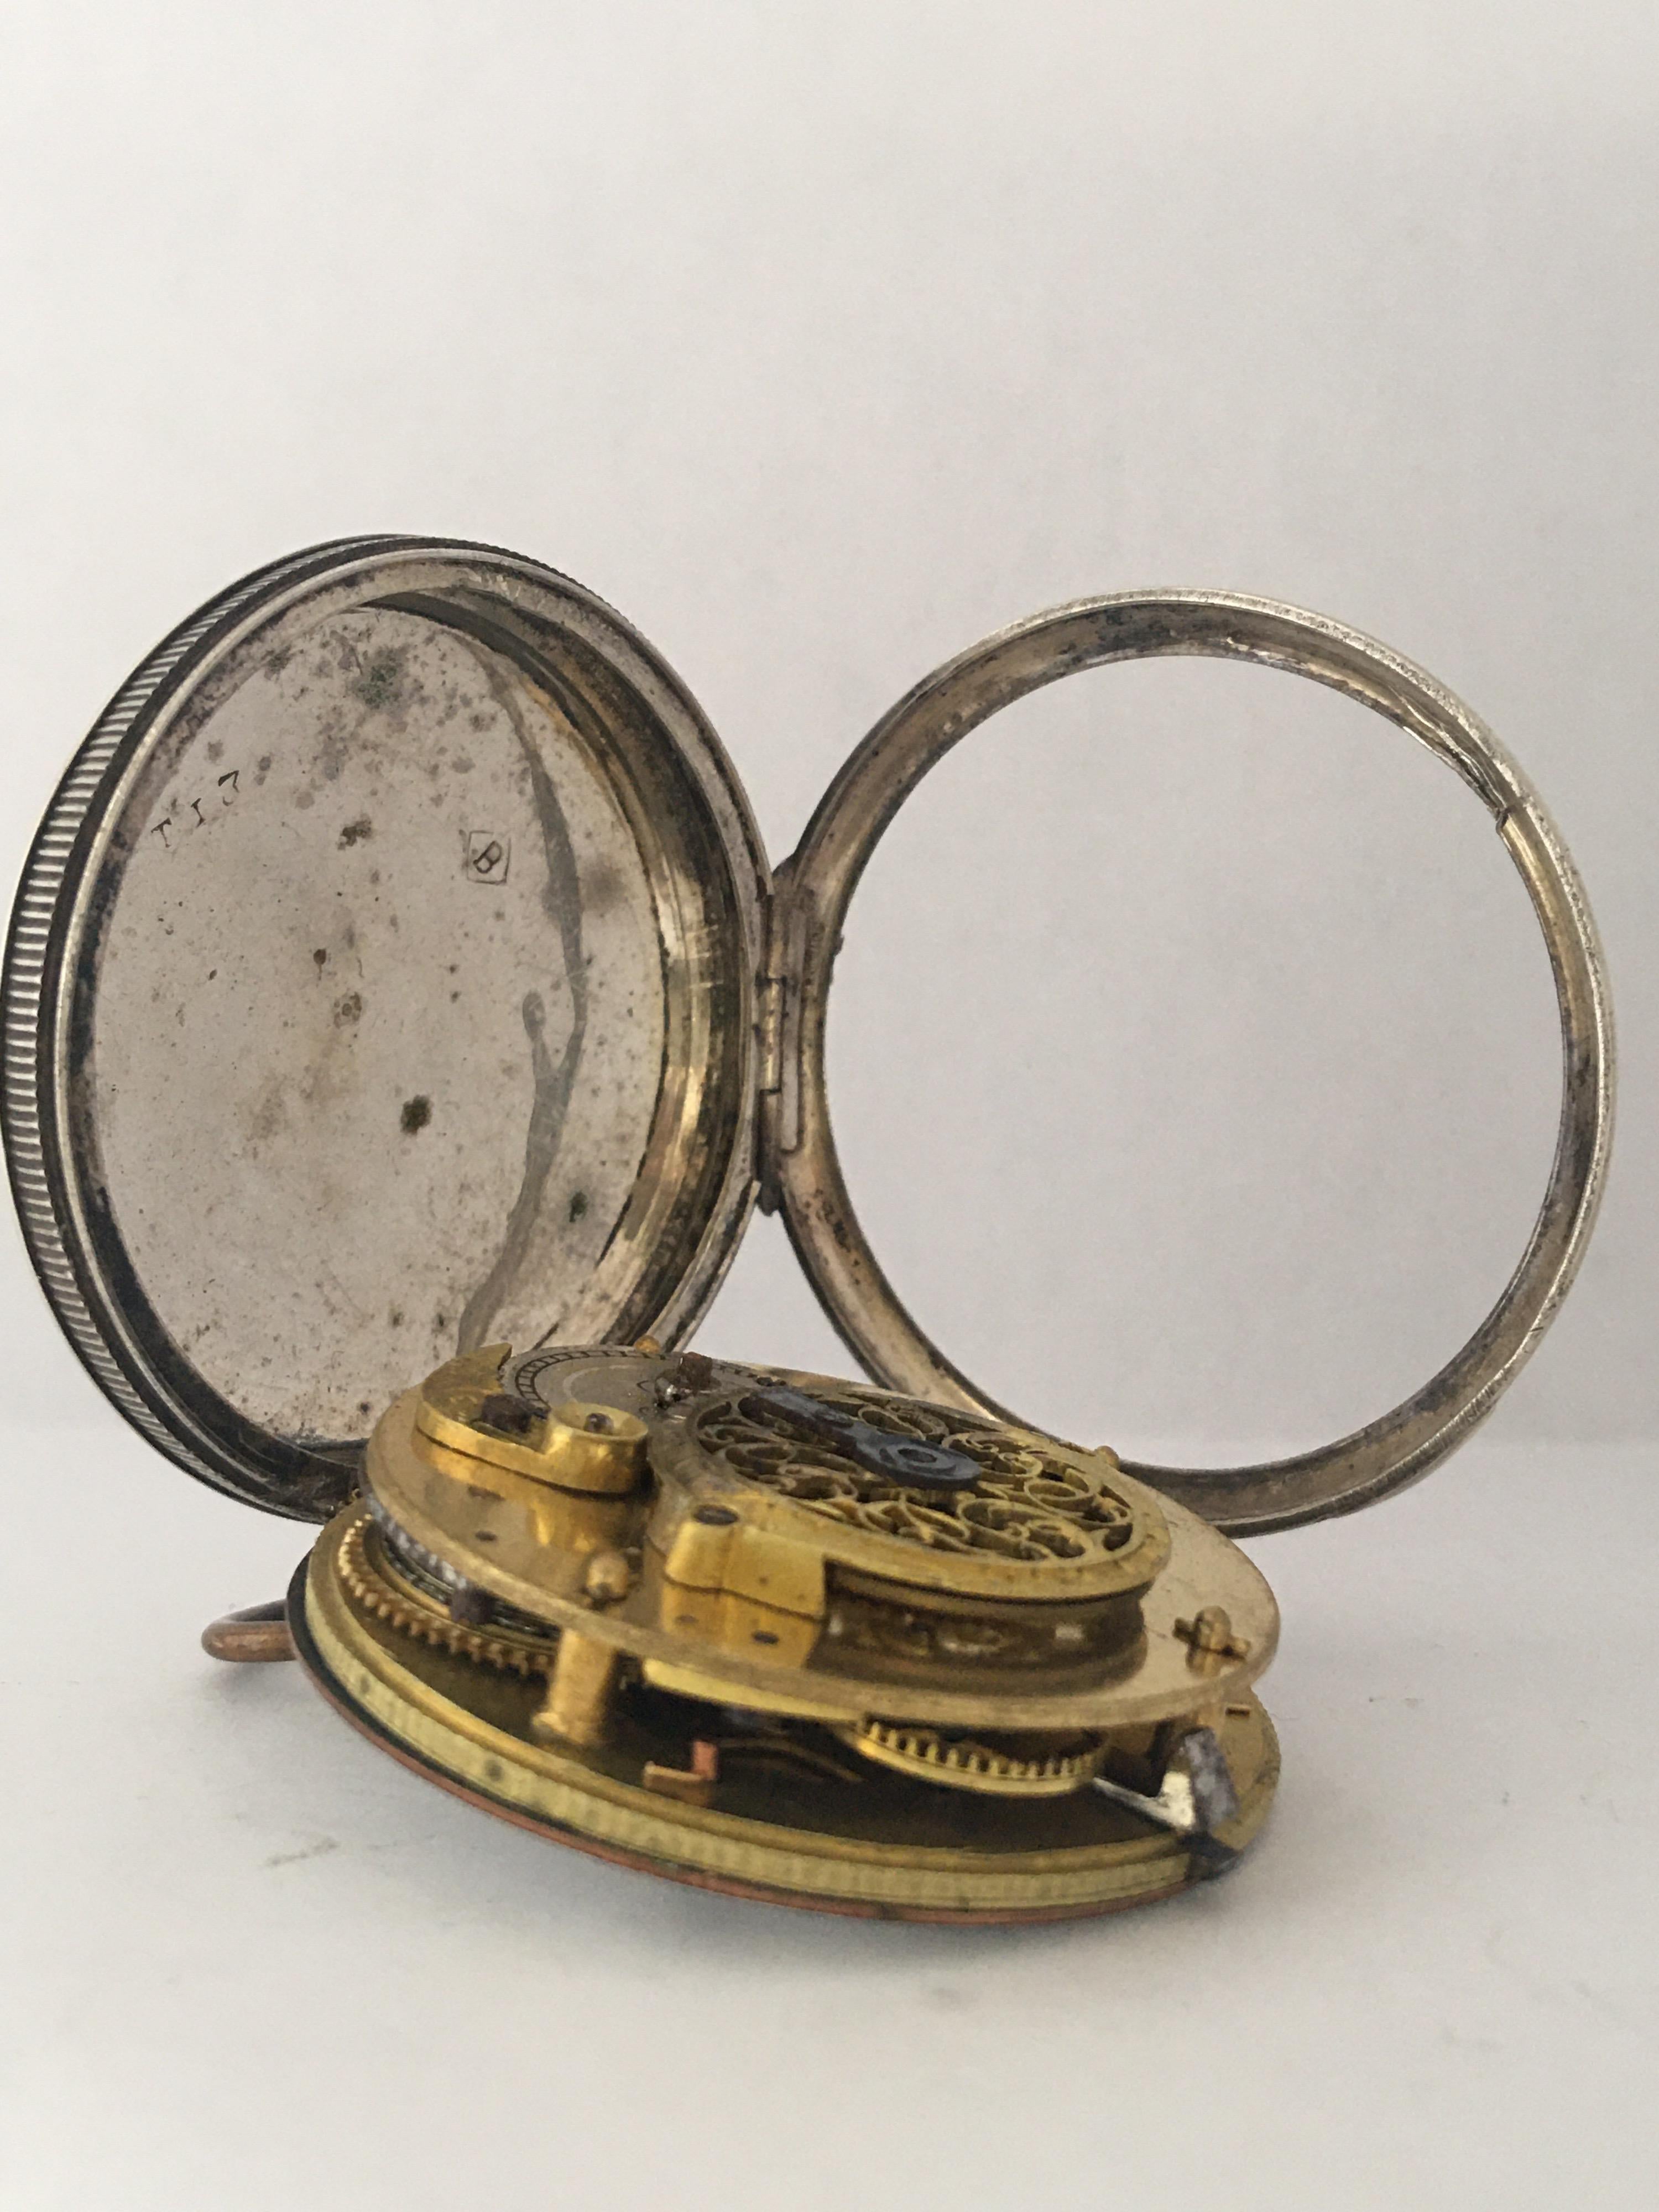 Early Rare Verge Fusee Silver Pocket Watch For Sale 3